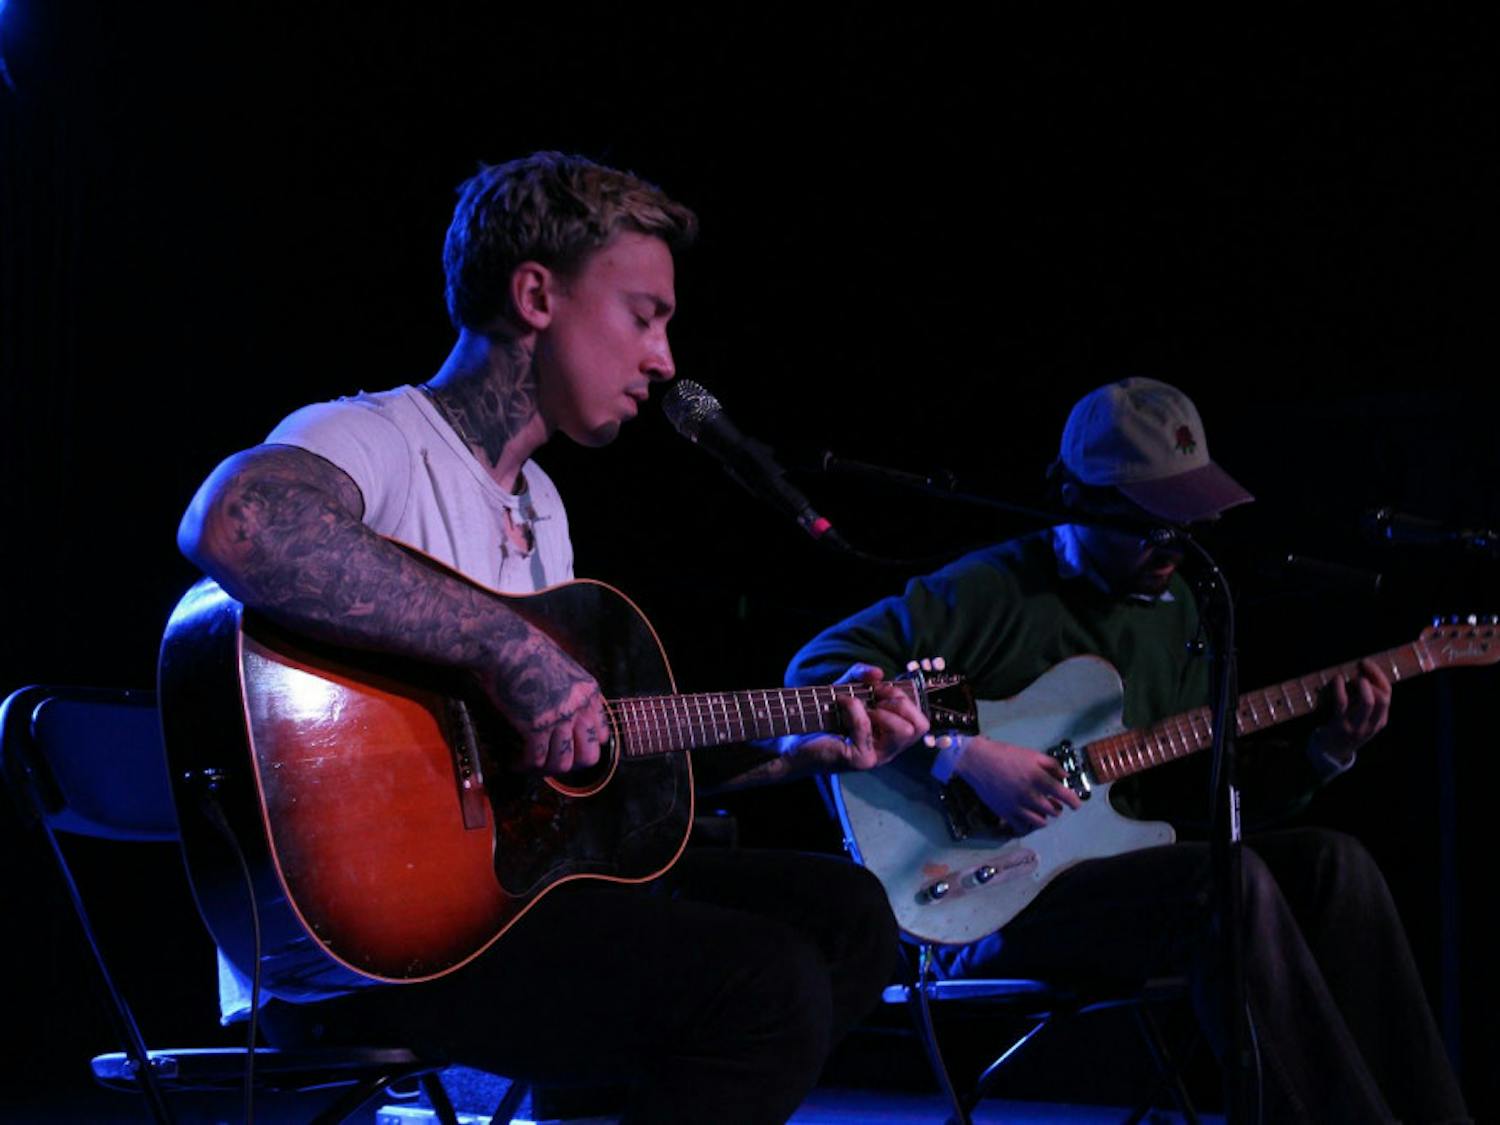 Musicians Noah Gundersen (left) and Harrison Whitford (right) collaborate during an acoustic performance on Sunday.